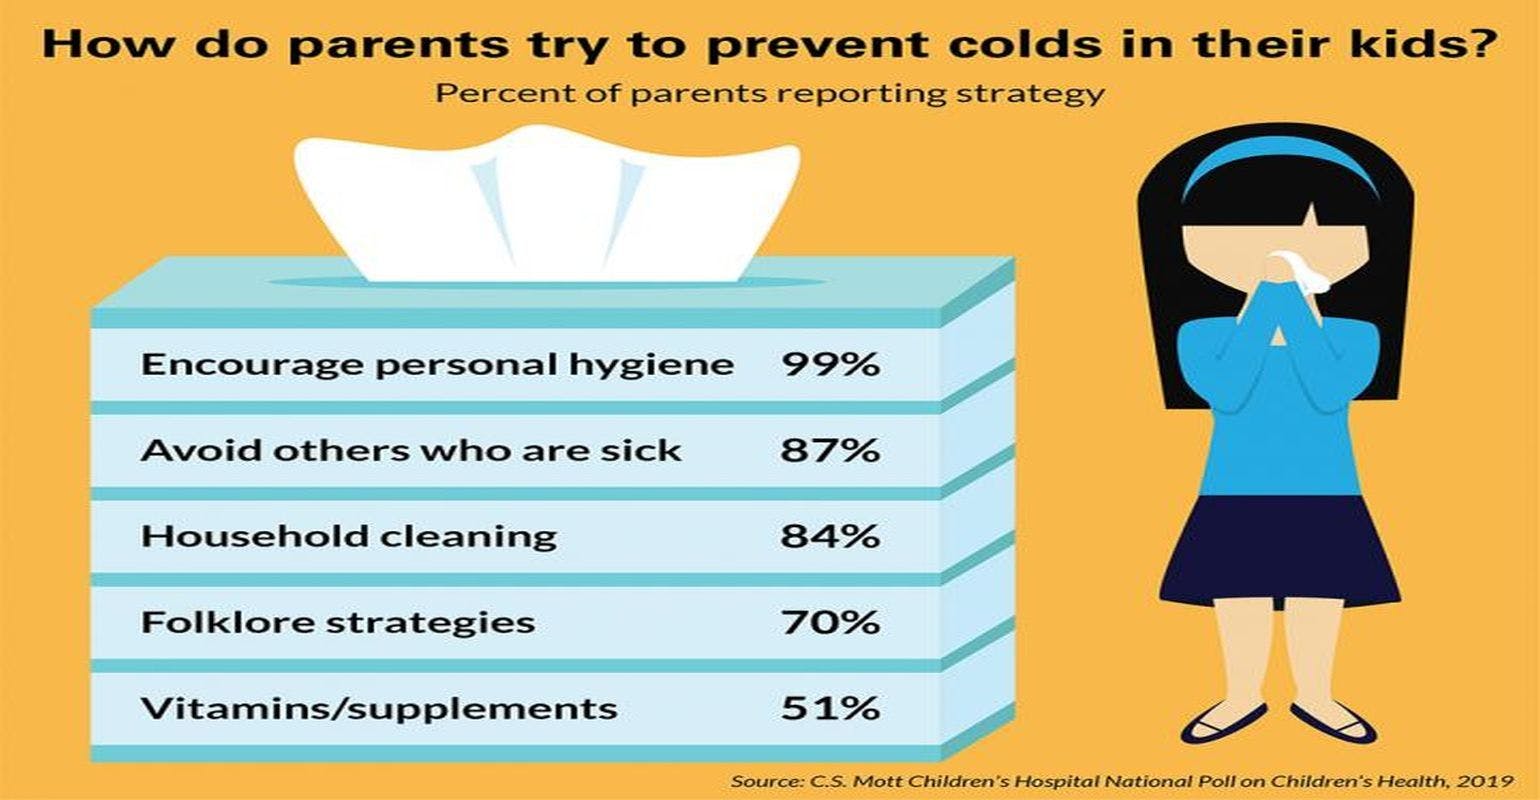 Poll Finds Surveyed Parents Try Non-Evidence-Based Cold Prevention Methods for Kids